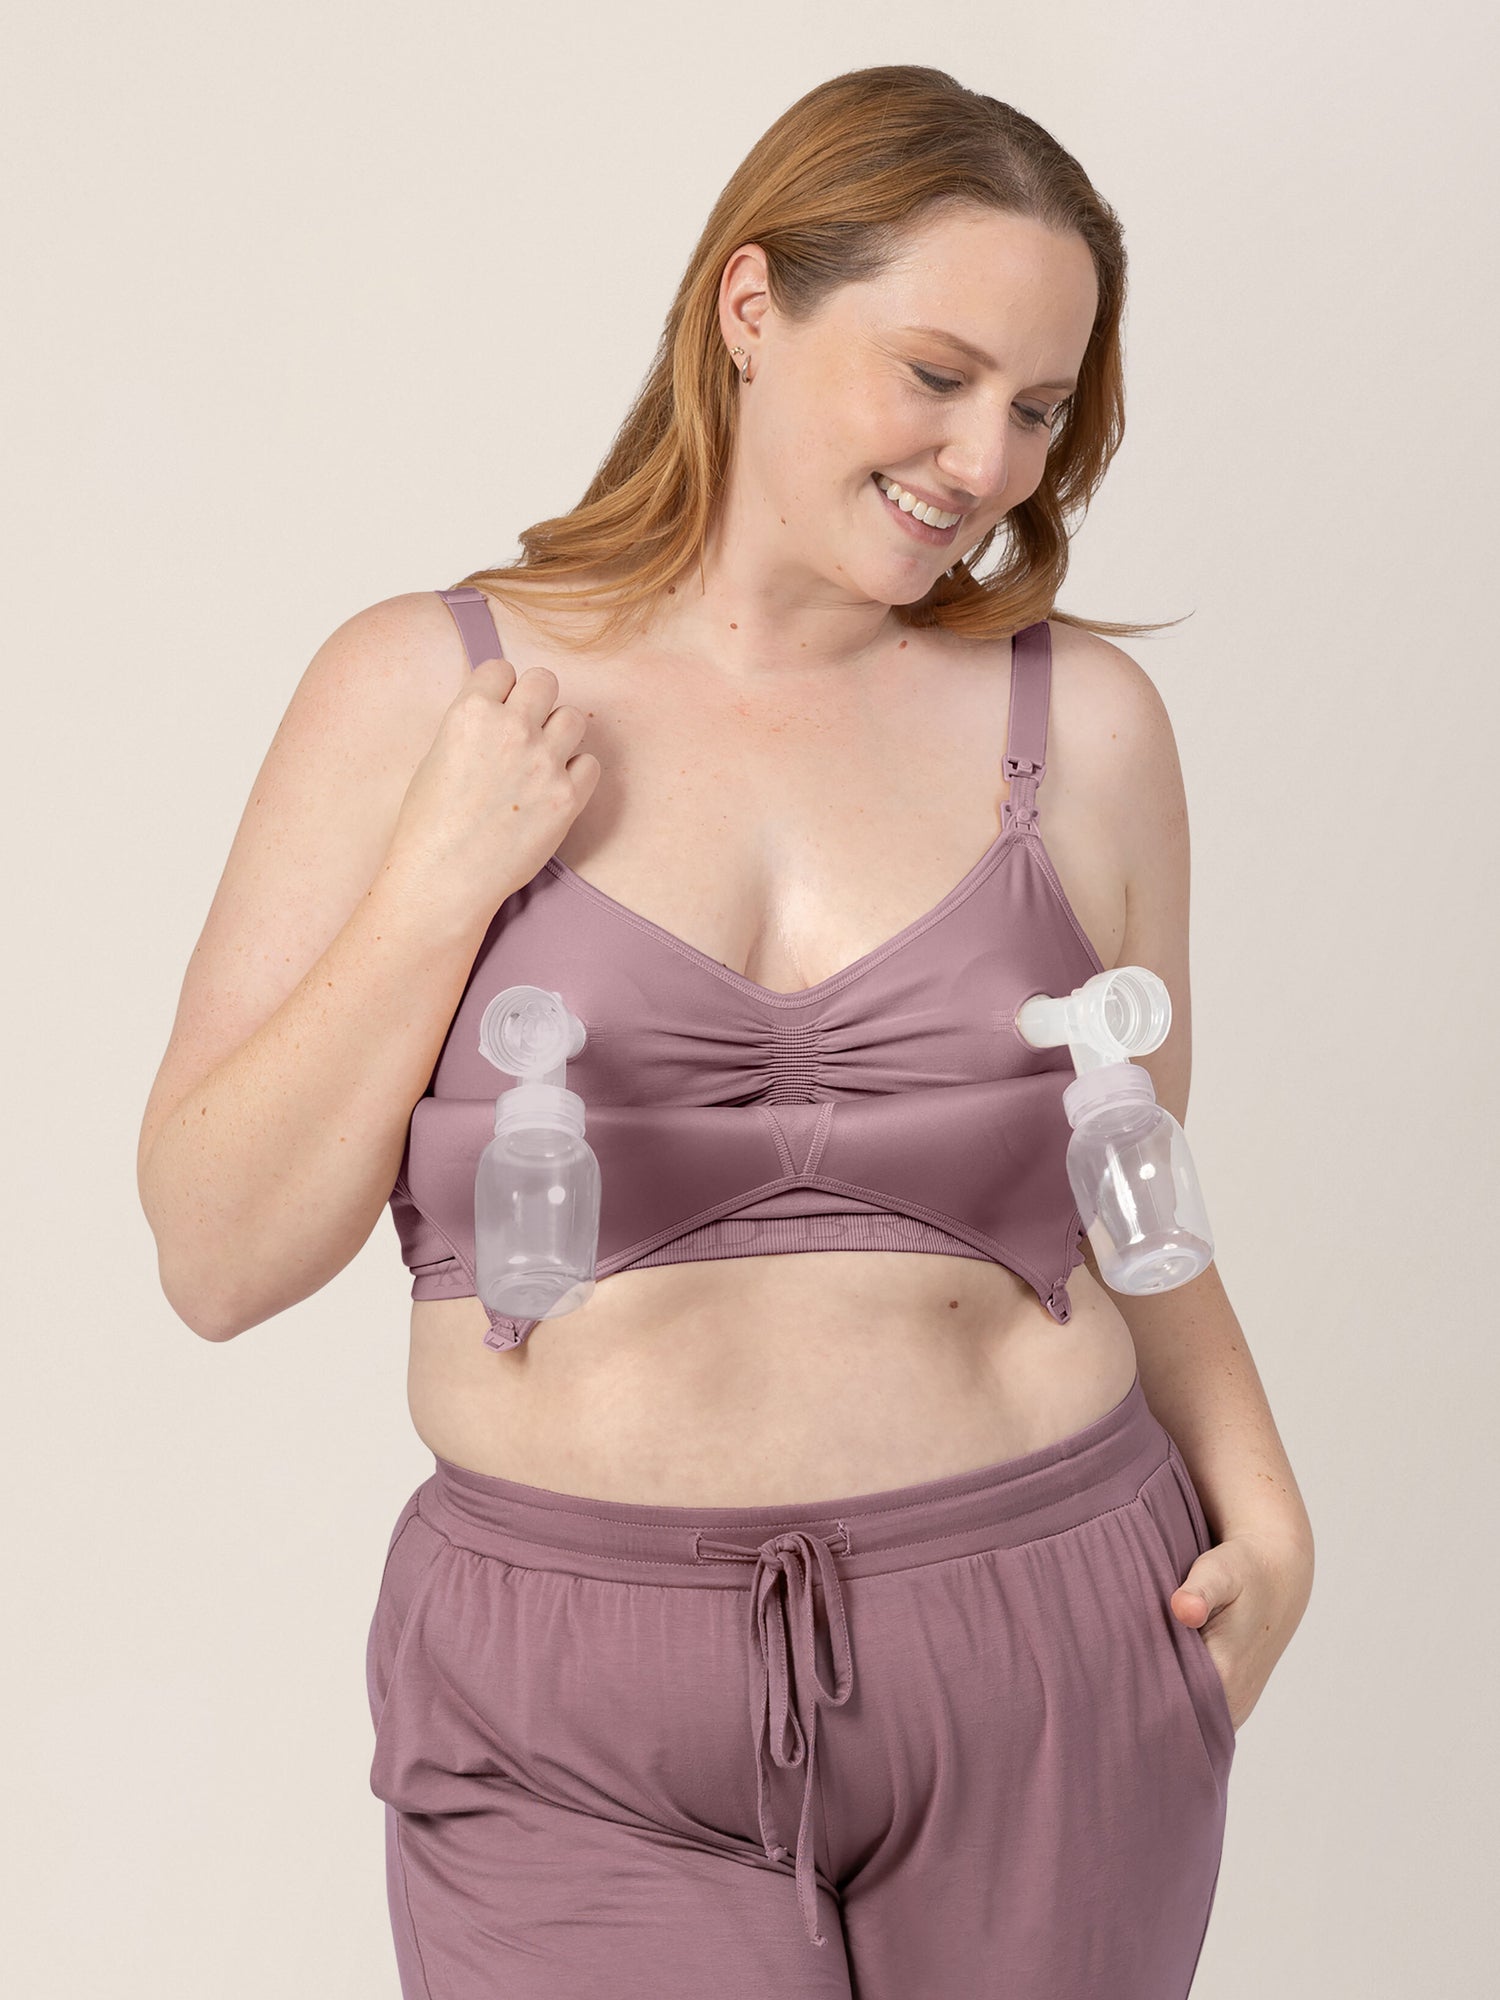 Model hooked up to two pumps while wearing the Signature Sublime® Contour Maternity & Nursing Bra in Twilight